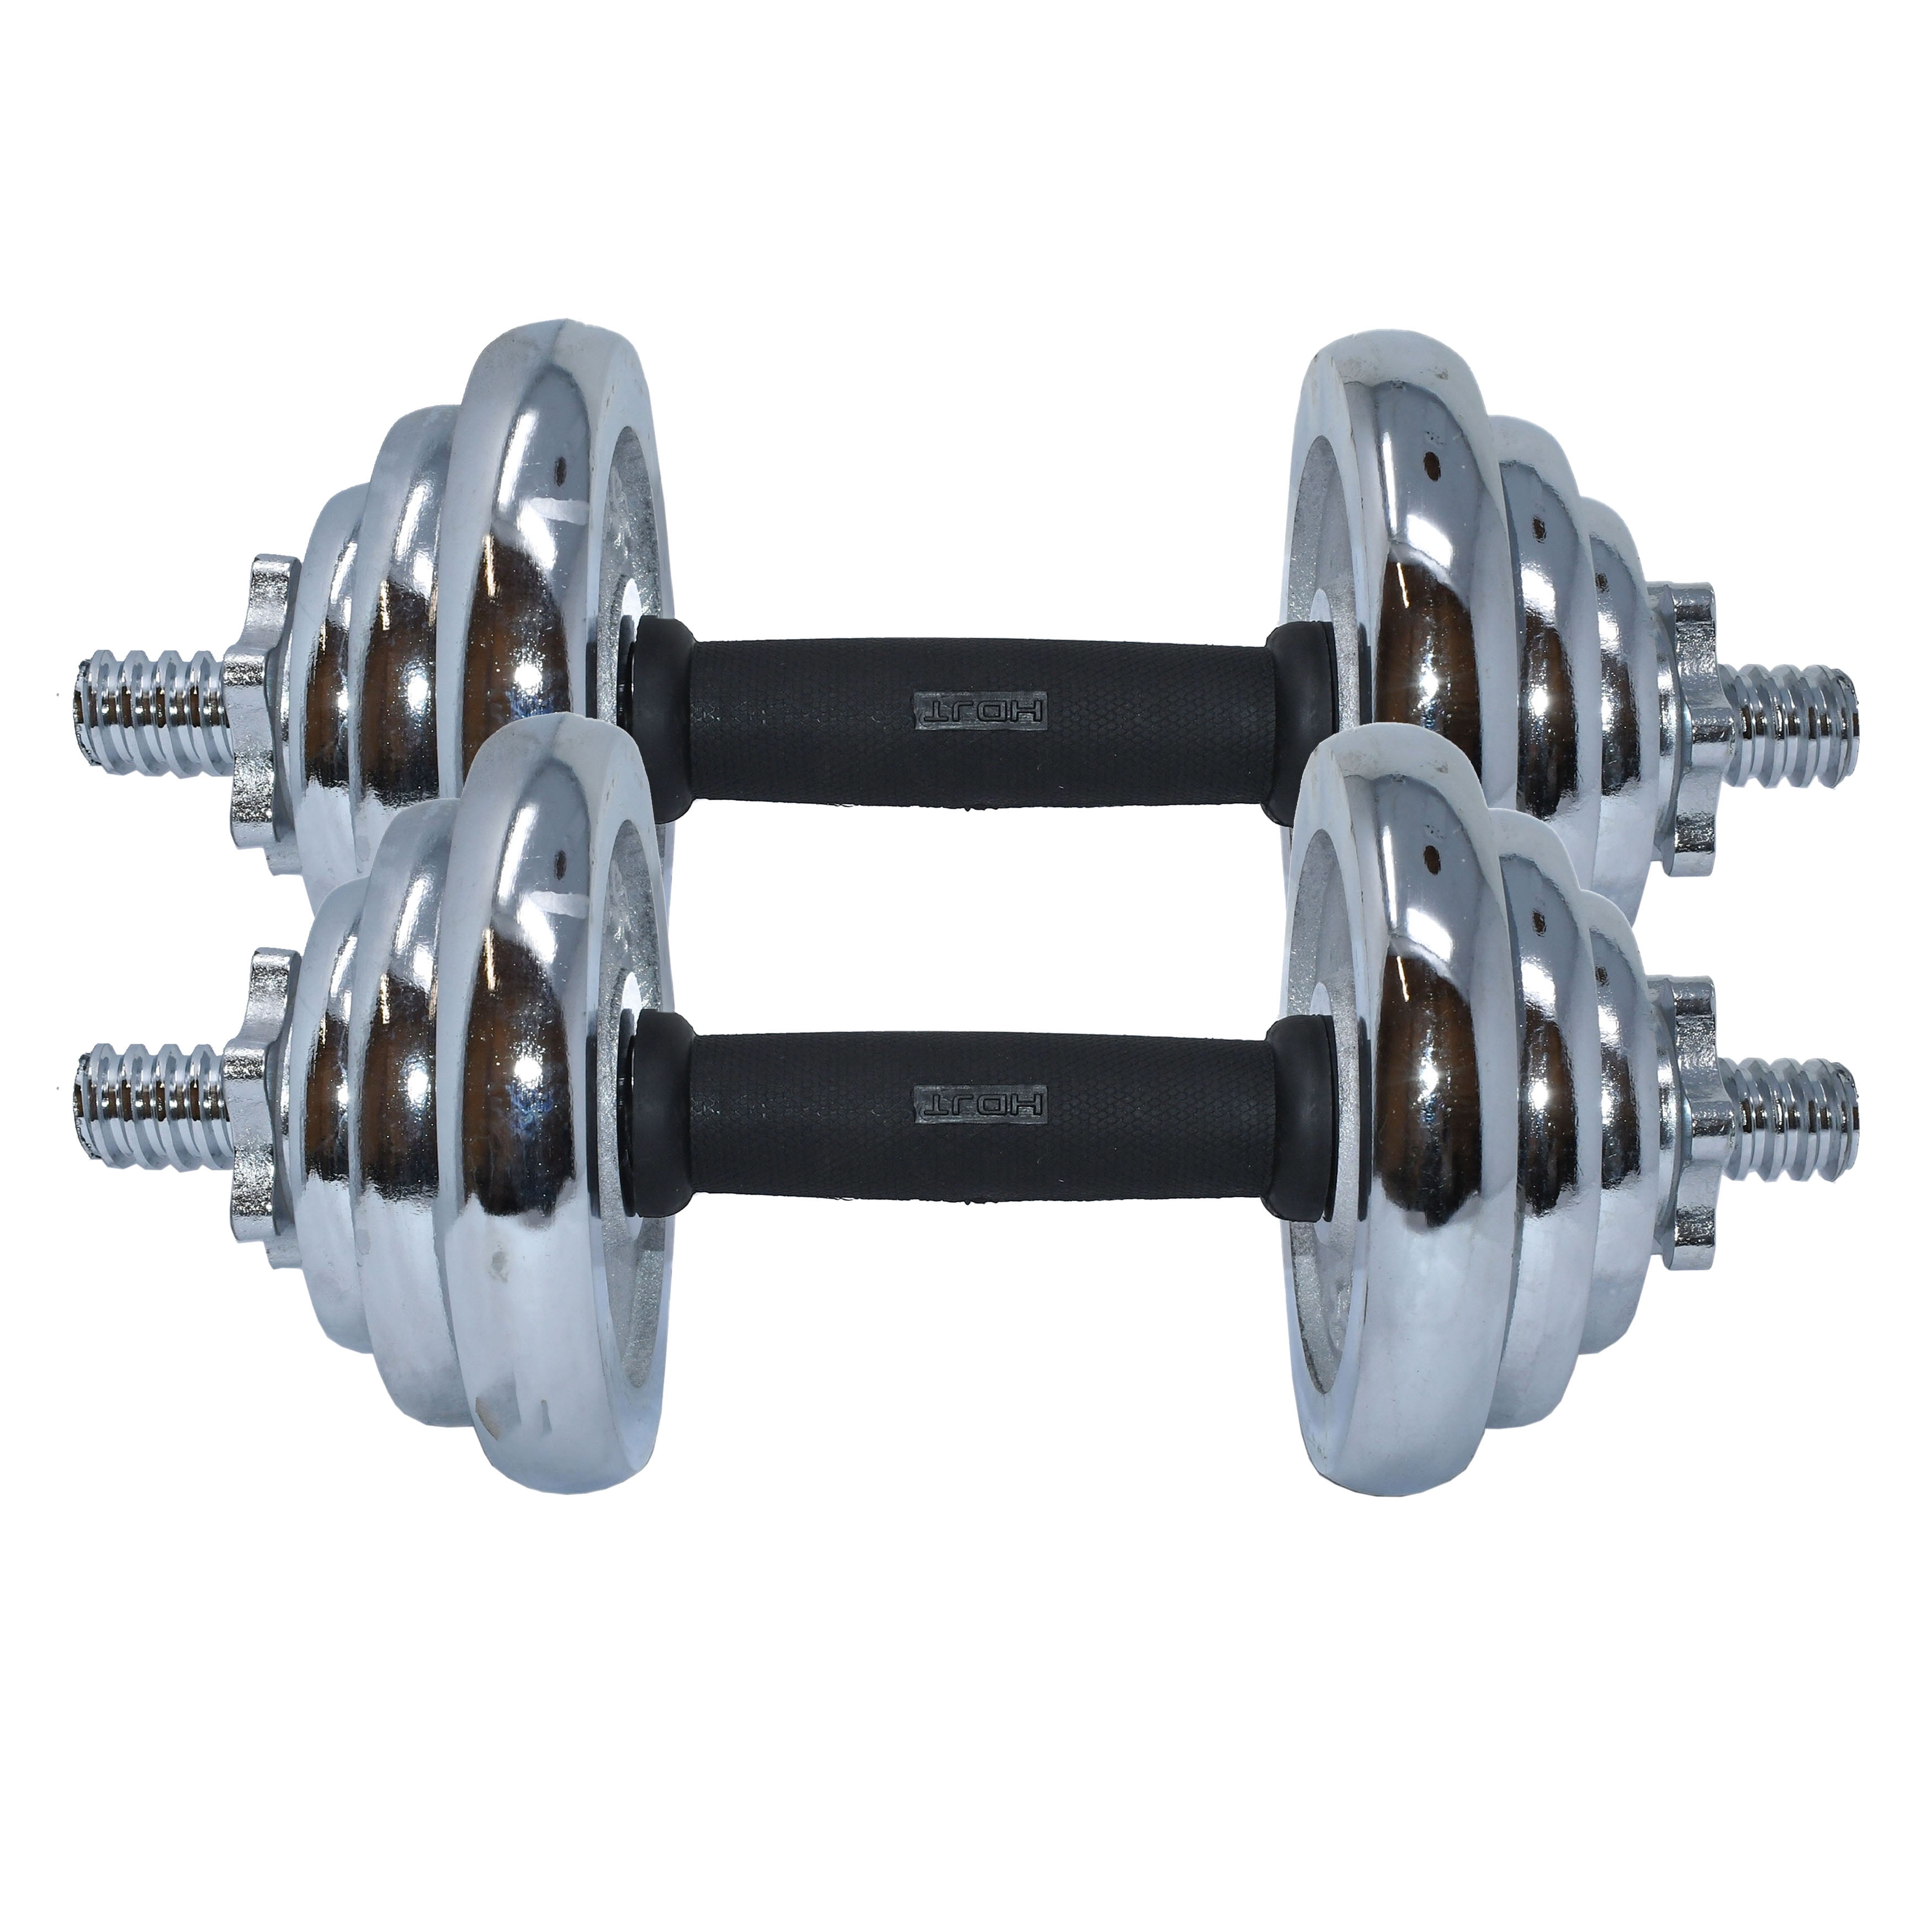 Adjustable Dumbbell Chrome Steel Weight Set 20KG 44LBS with Barbell Option Kit 